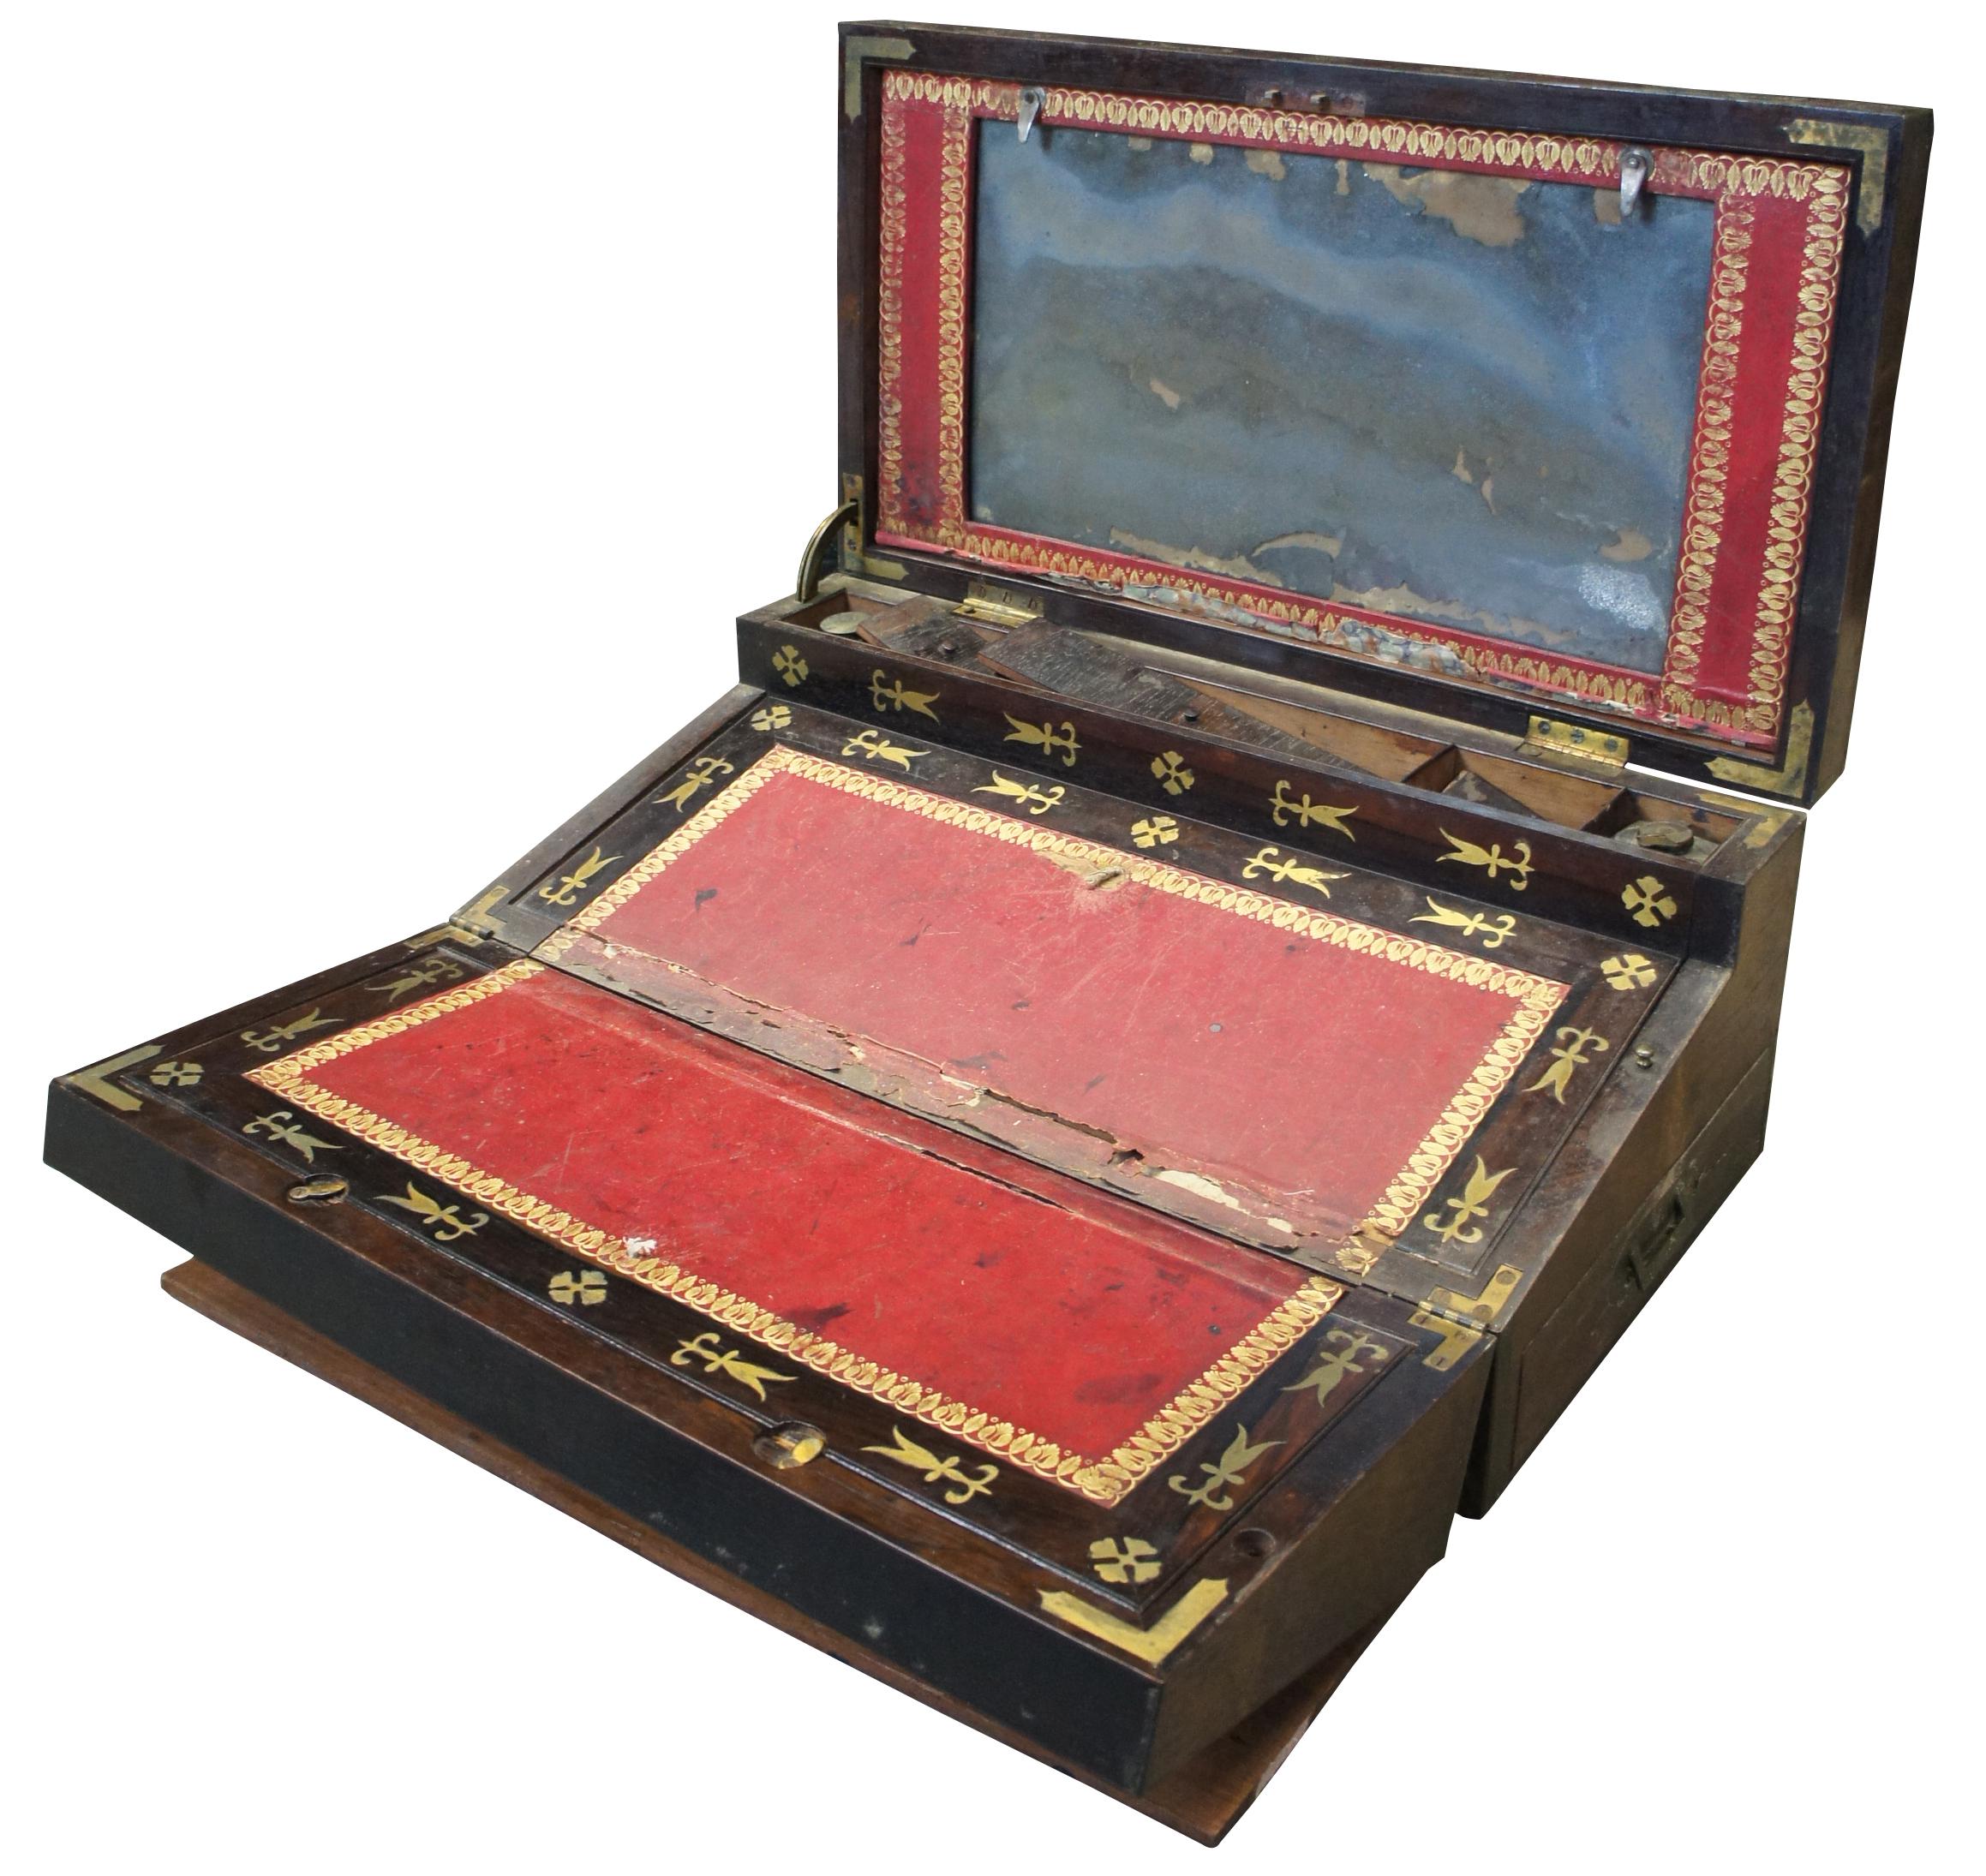 Antique early 19th century writing slope/storage chest, made of wood with brass hardware and inlays, mirror, bonded leather writing surfaces, two glass inkwells, and one semi-concealed drawer in the side, which locks with a brass pin.
   